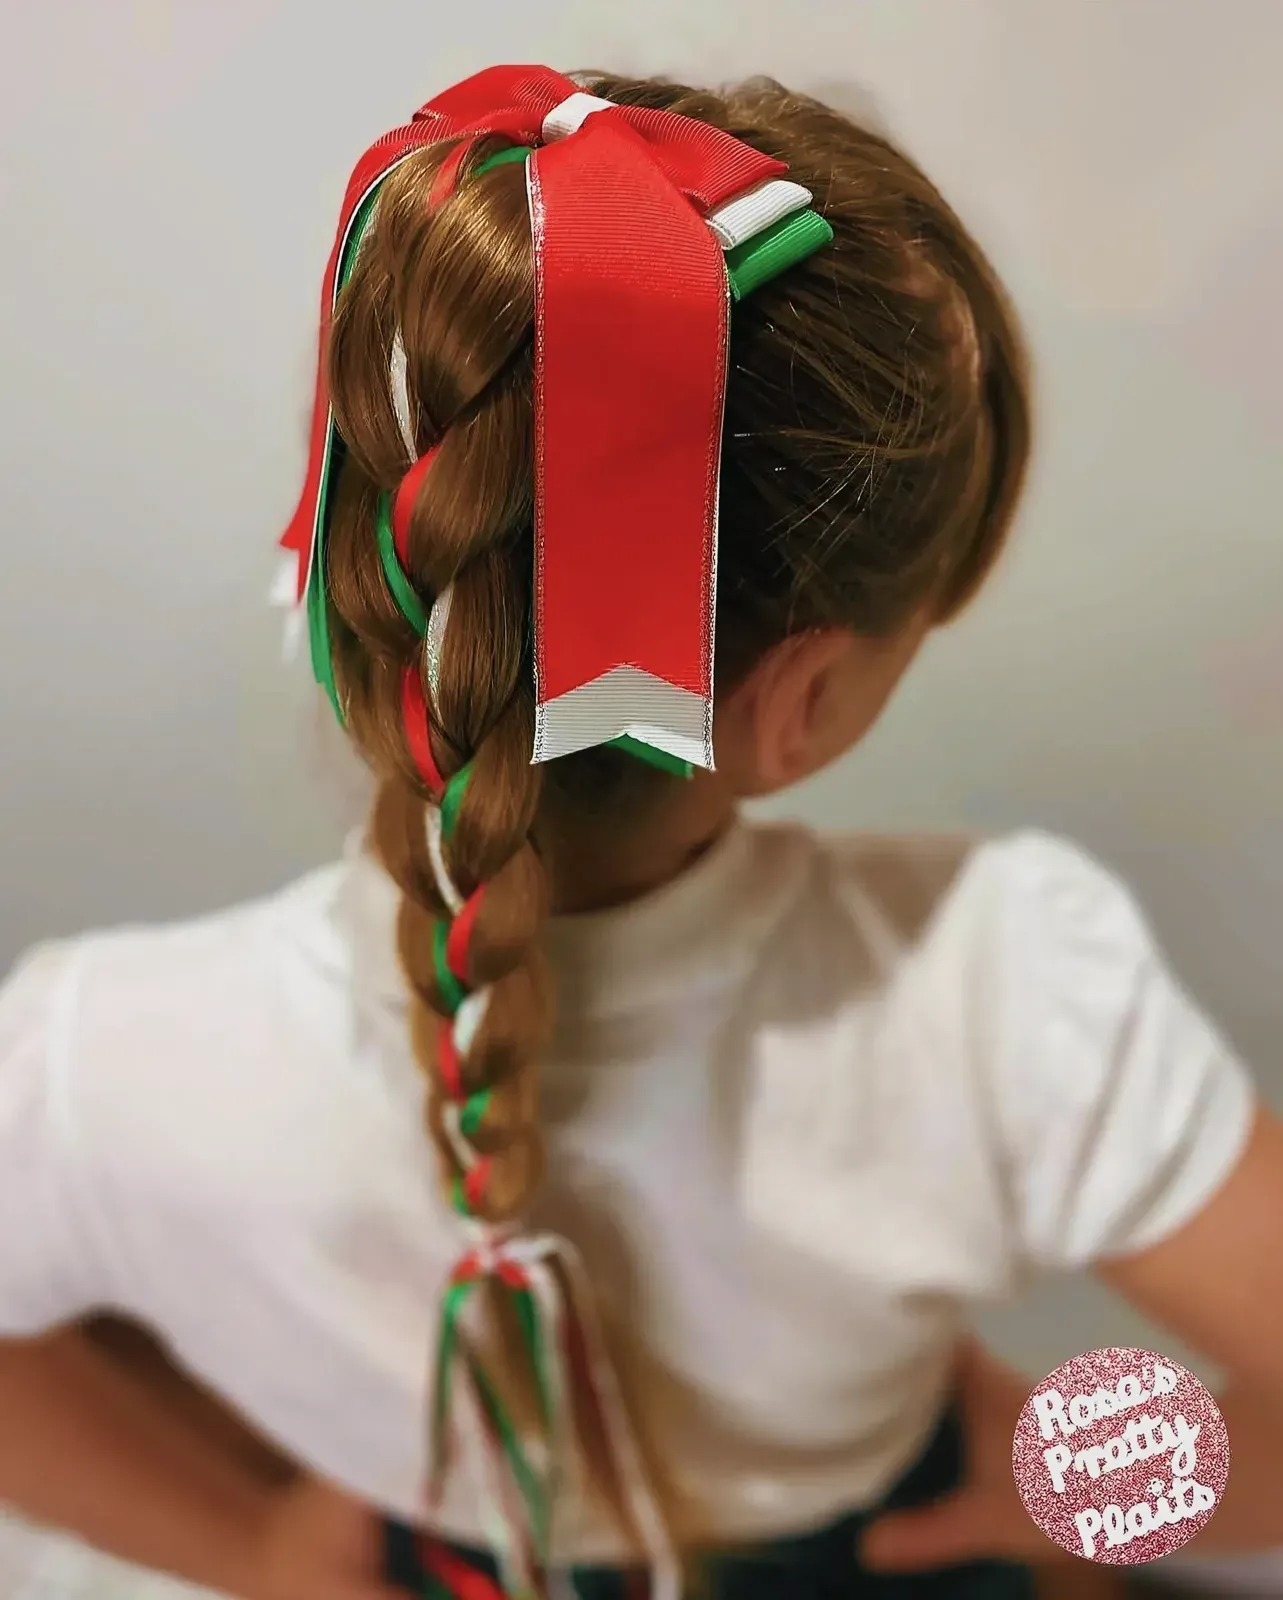 Young girl with a red and white ribbon braid hairstyle